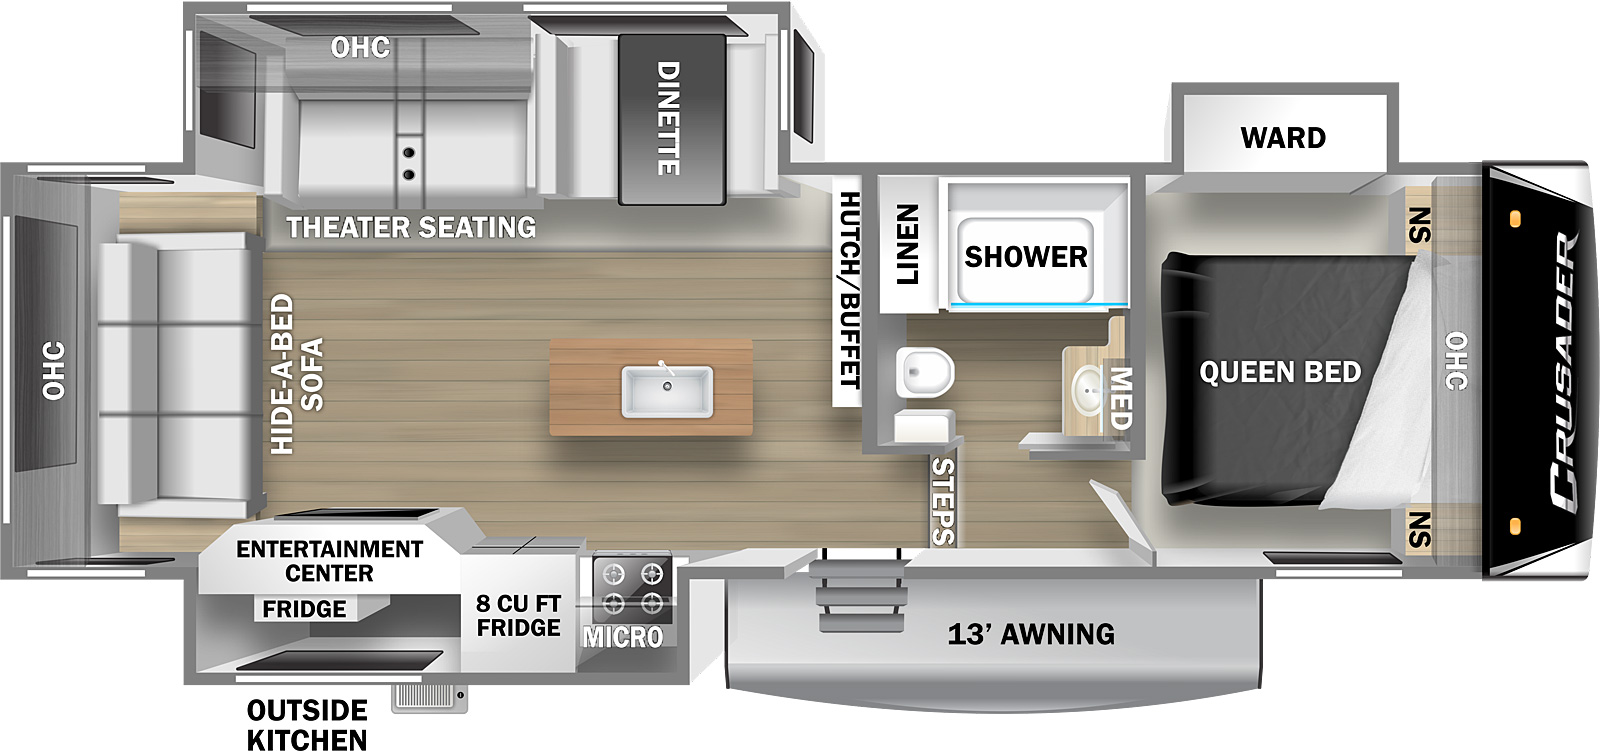 Crusader Lite 29RS floorplan. The 29RS has 2 slide outs and one entry door.